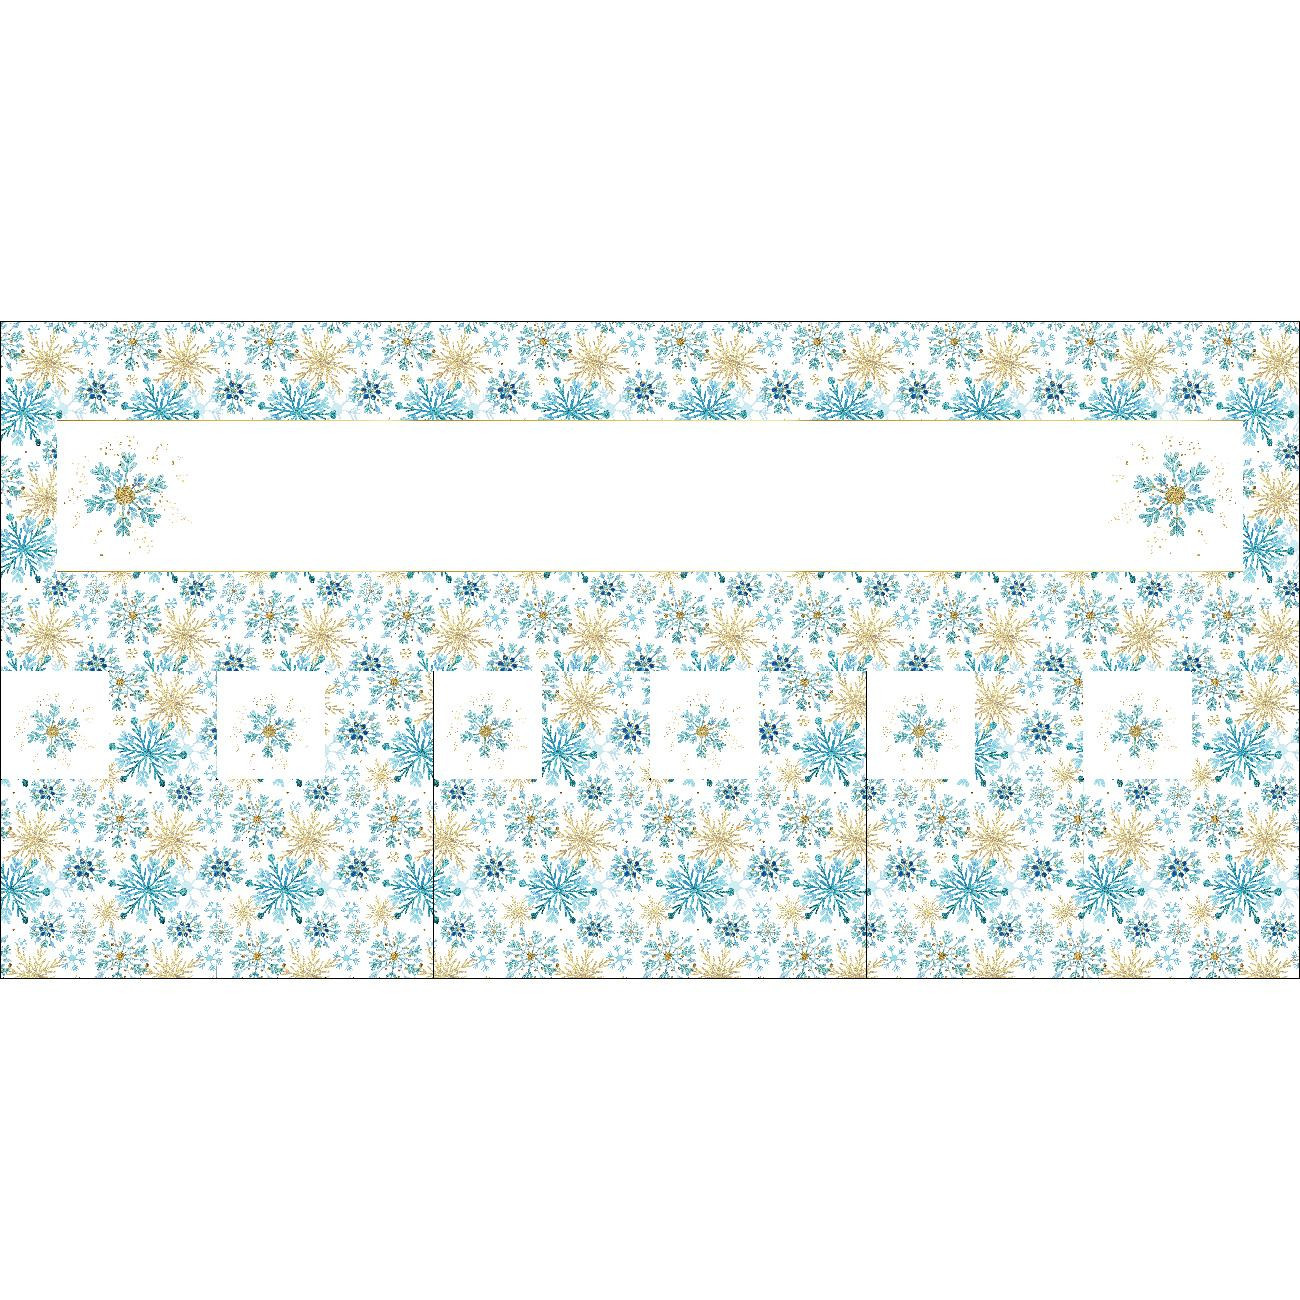 NAPKINS AND RUNNER - BLUE SNOWFLAKES - sewing set